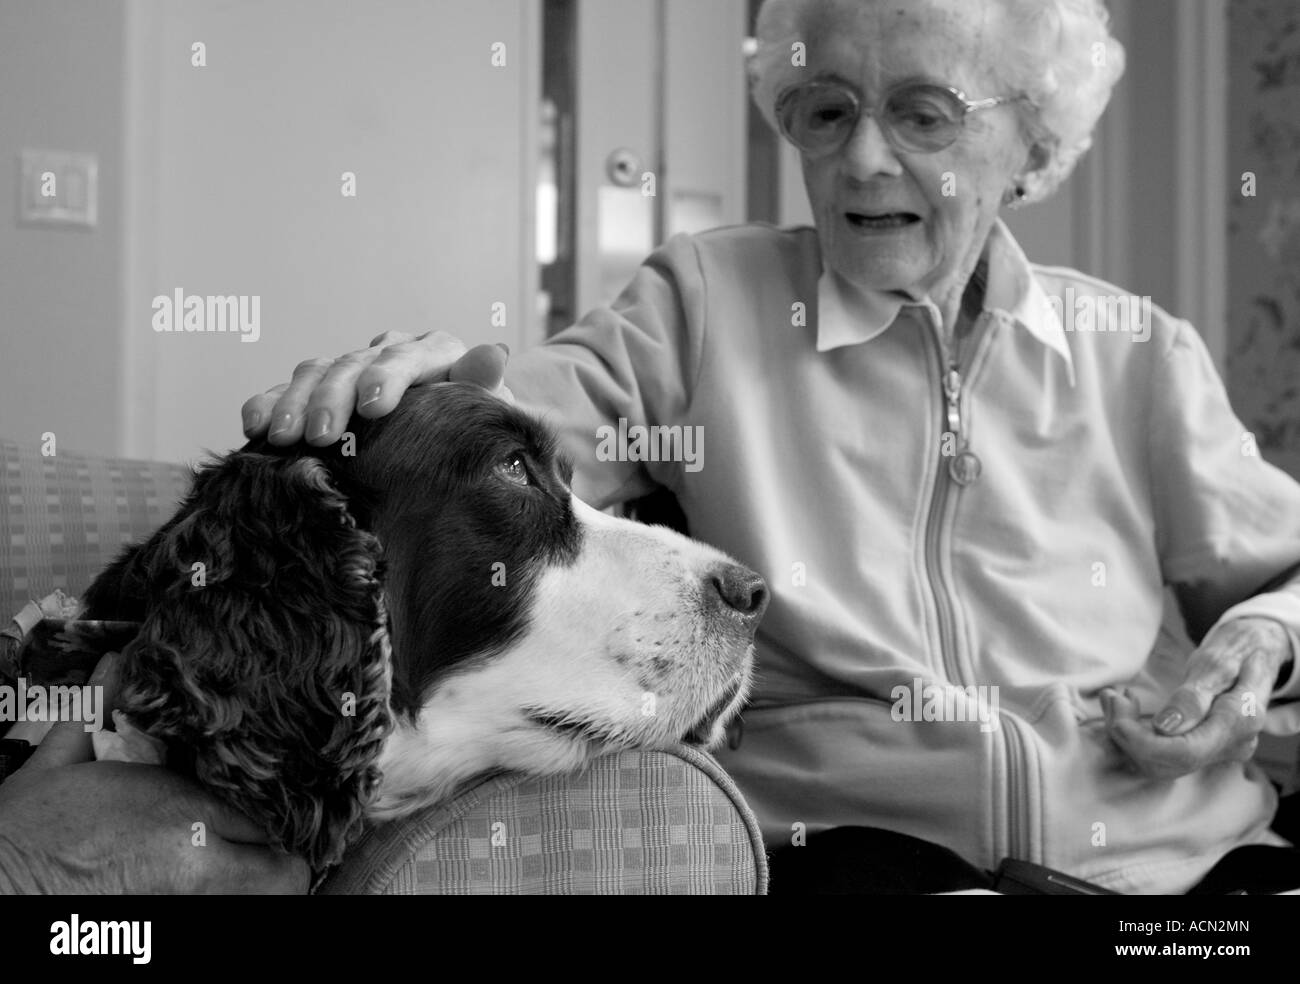 A service dog gets petted by an elderly woman in a senior center in Connecticut USA Stock Photo